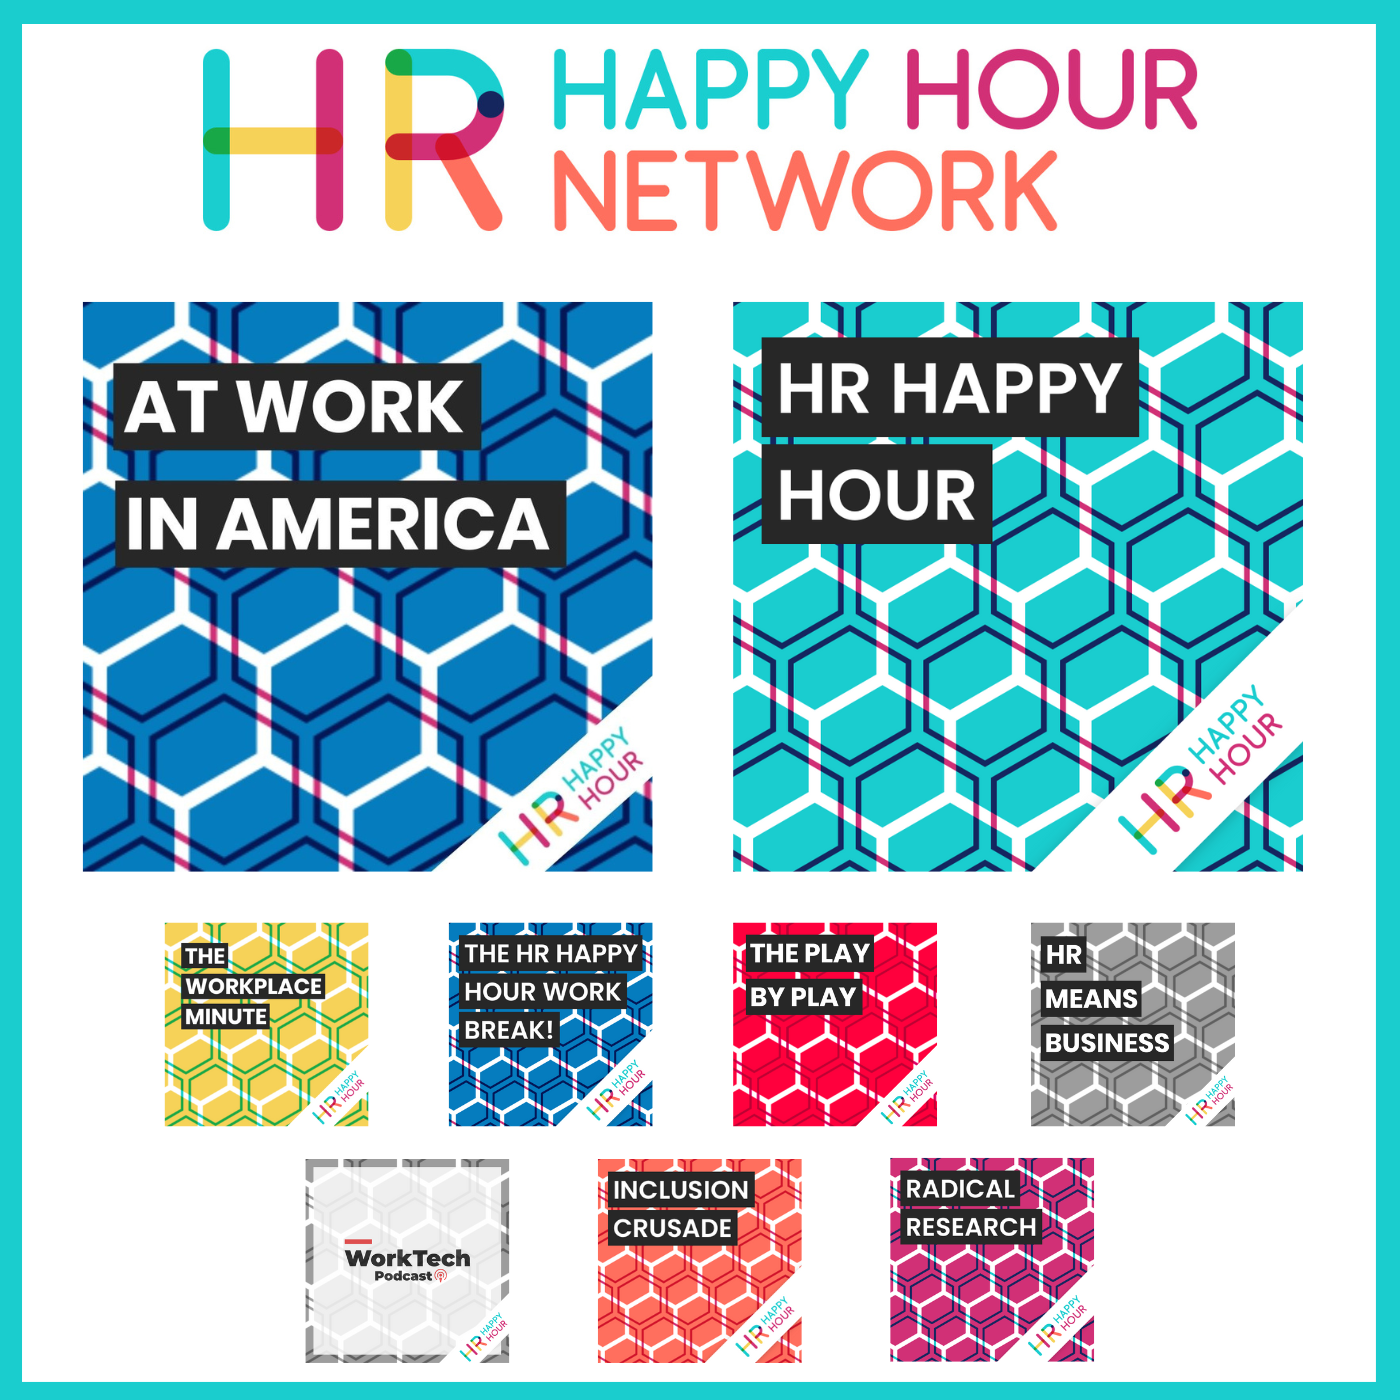 Logos of the HR Happy Hour Media Network shows